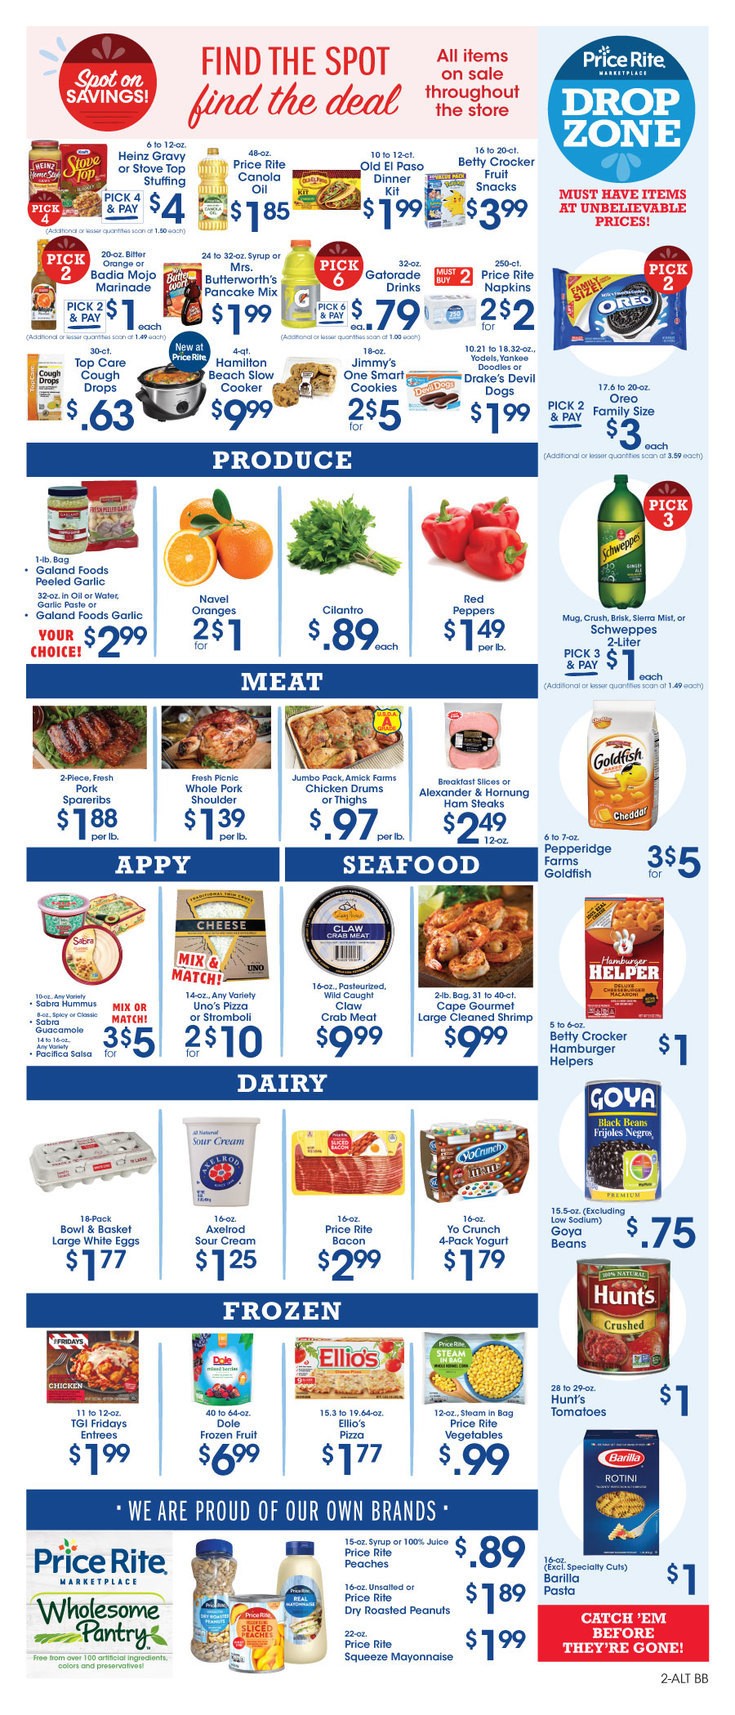 Price Rite Weekly Ad from January 31